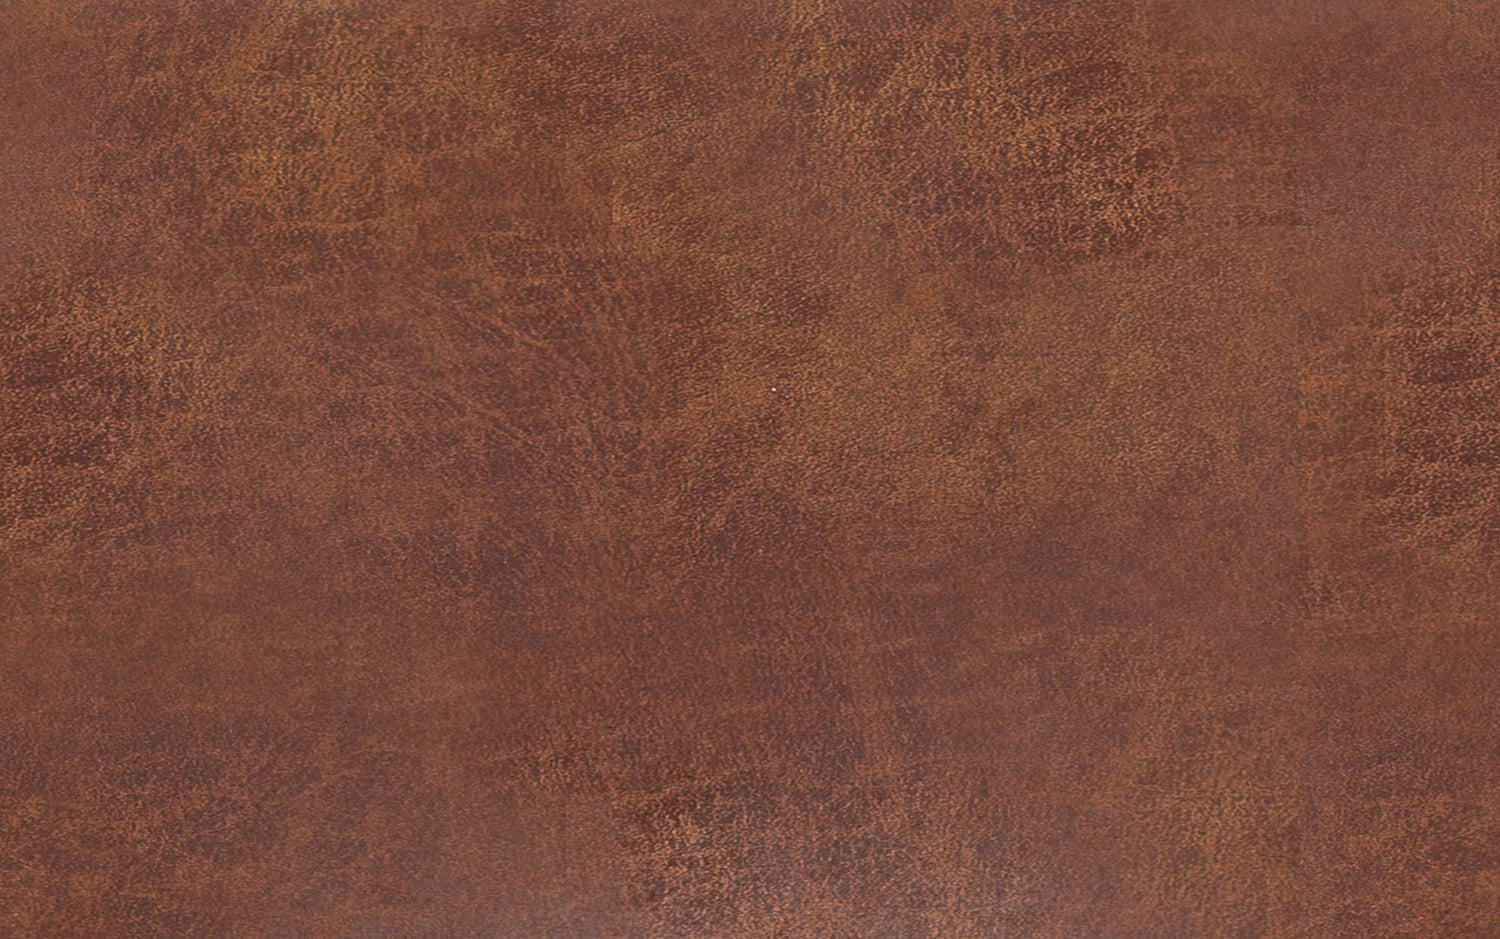 Distressed Saddle Brown Distressed Vegan Leather | Robson Accent Chair